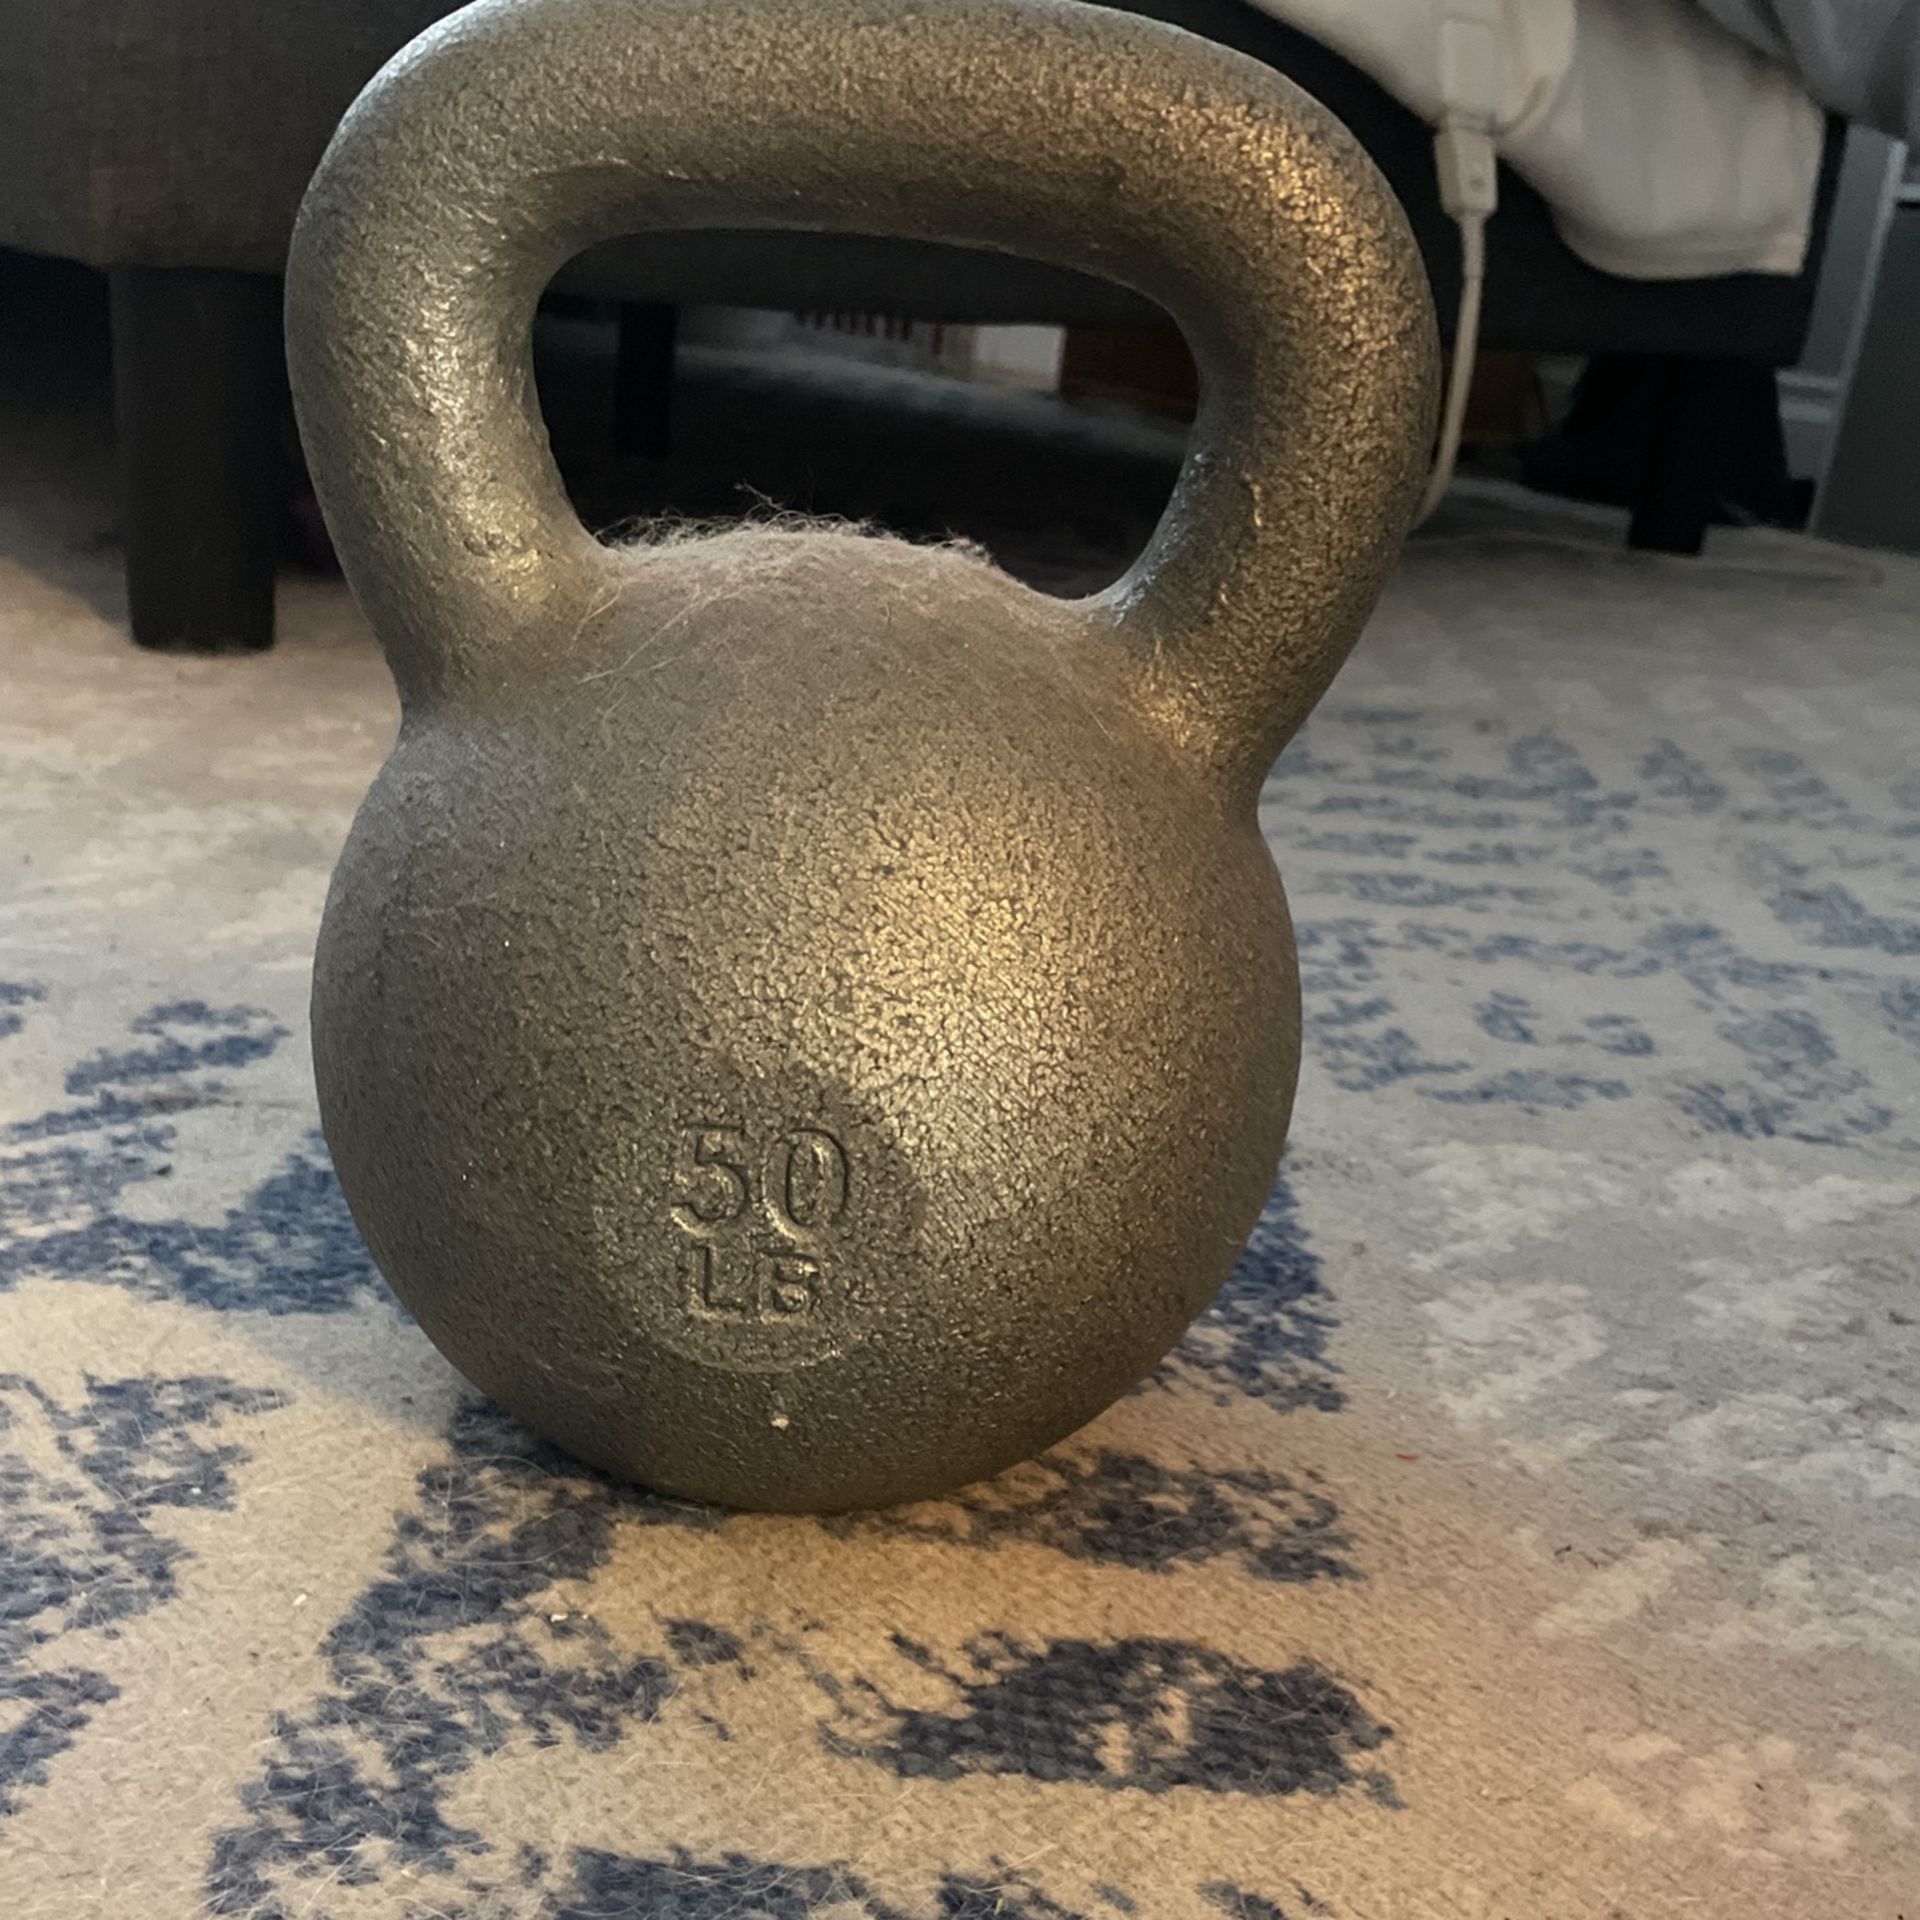 50 Pound Kettle Bell